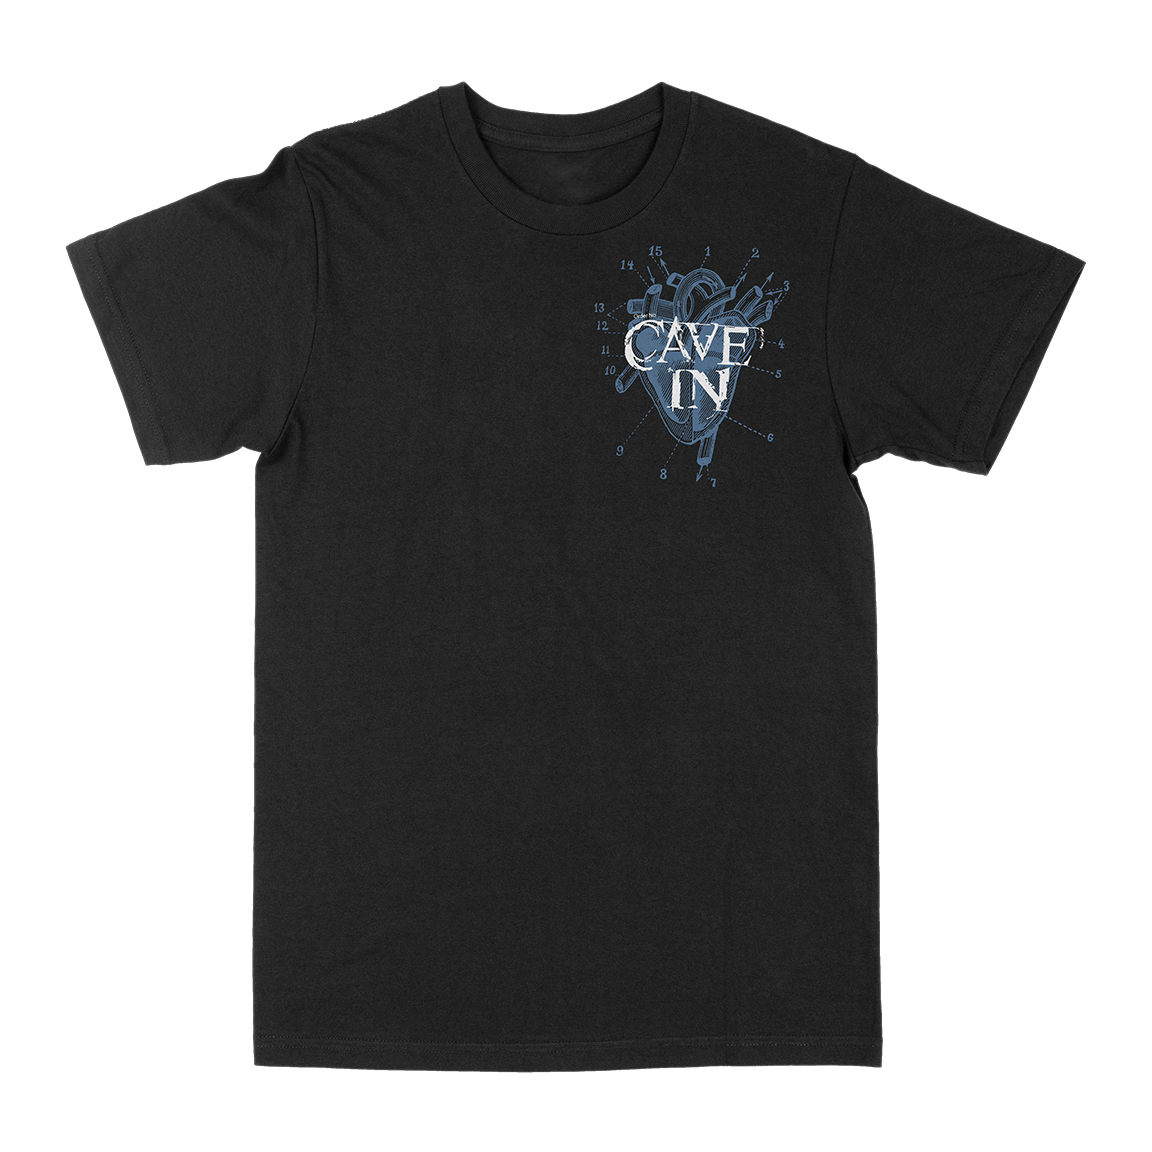 CAVE IN "UYHS Small Heart“ Black T-Shirt